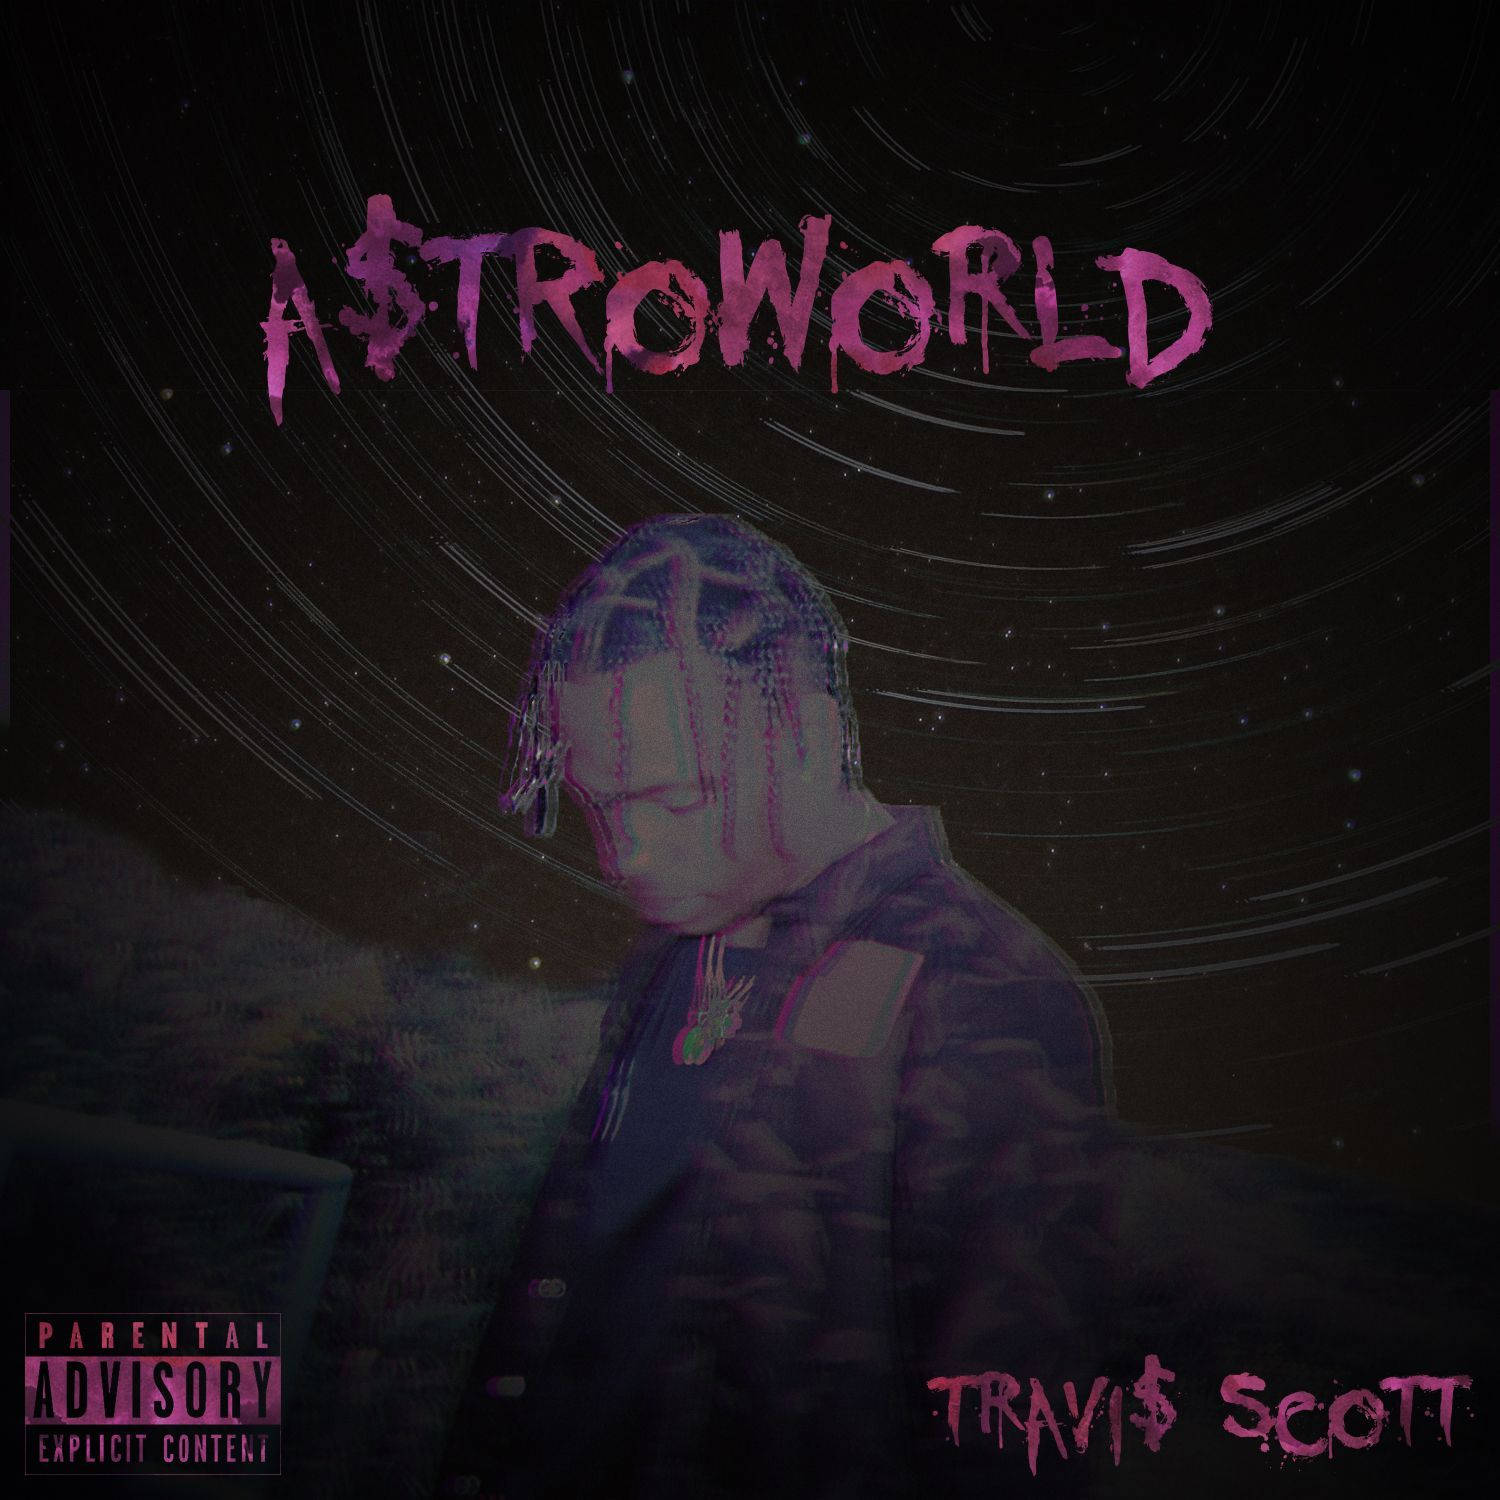 Welcome to Astroworld Wallpaper